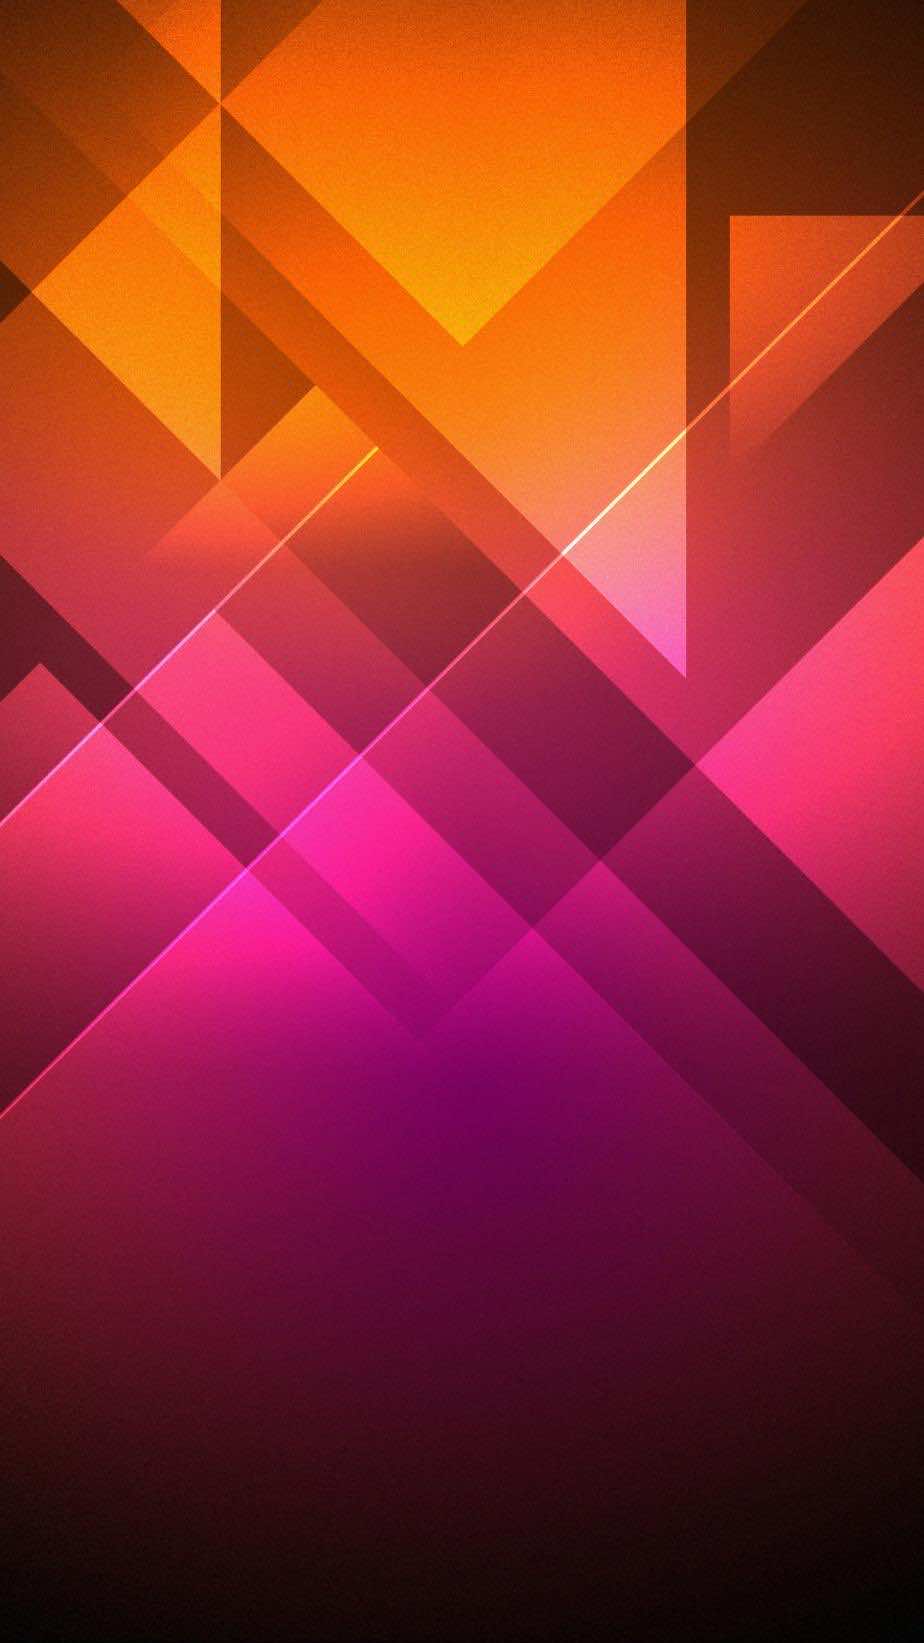 45 HTC Wallpaper Images in HD Free Download for Mobile